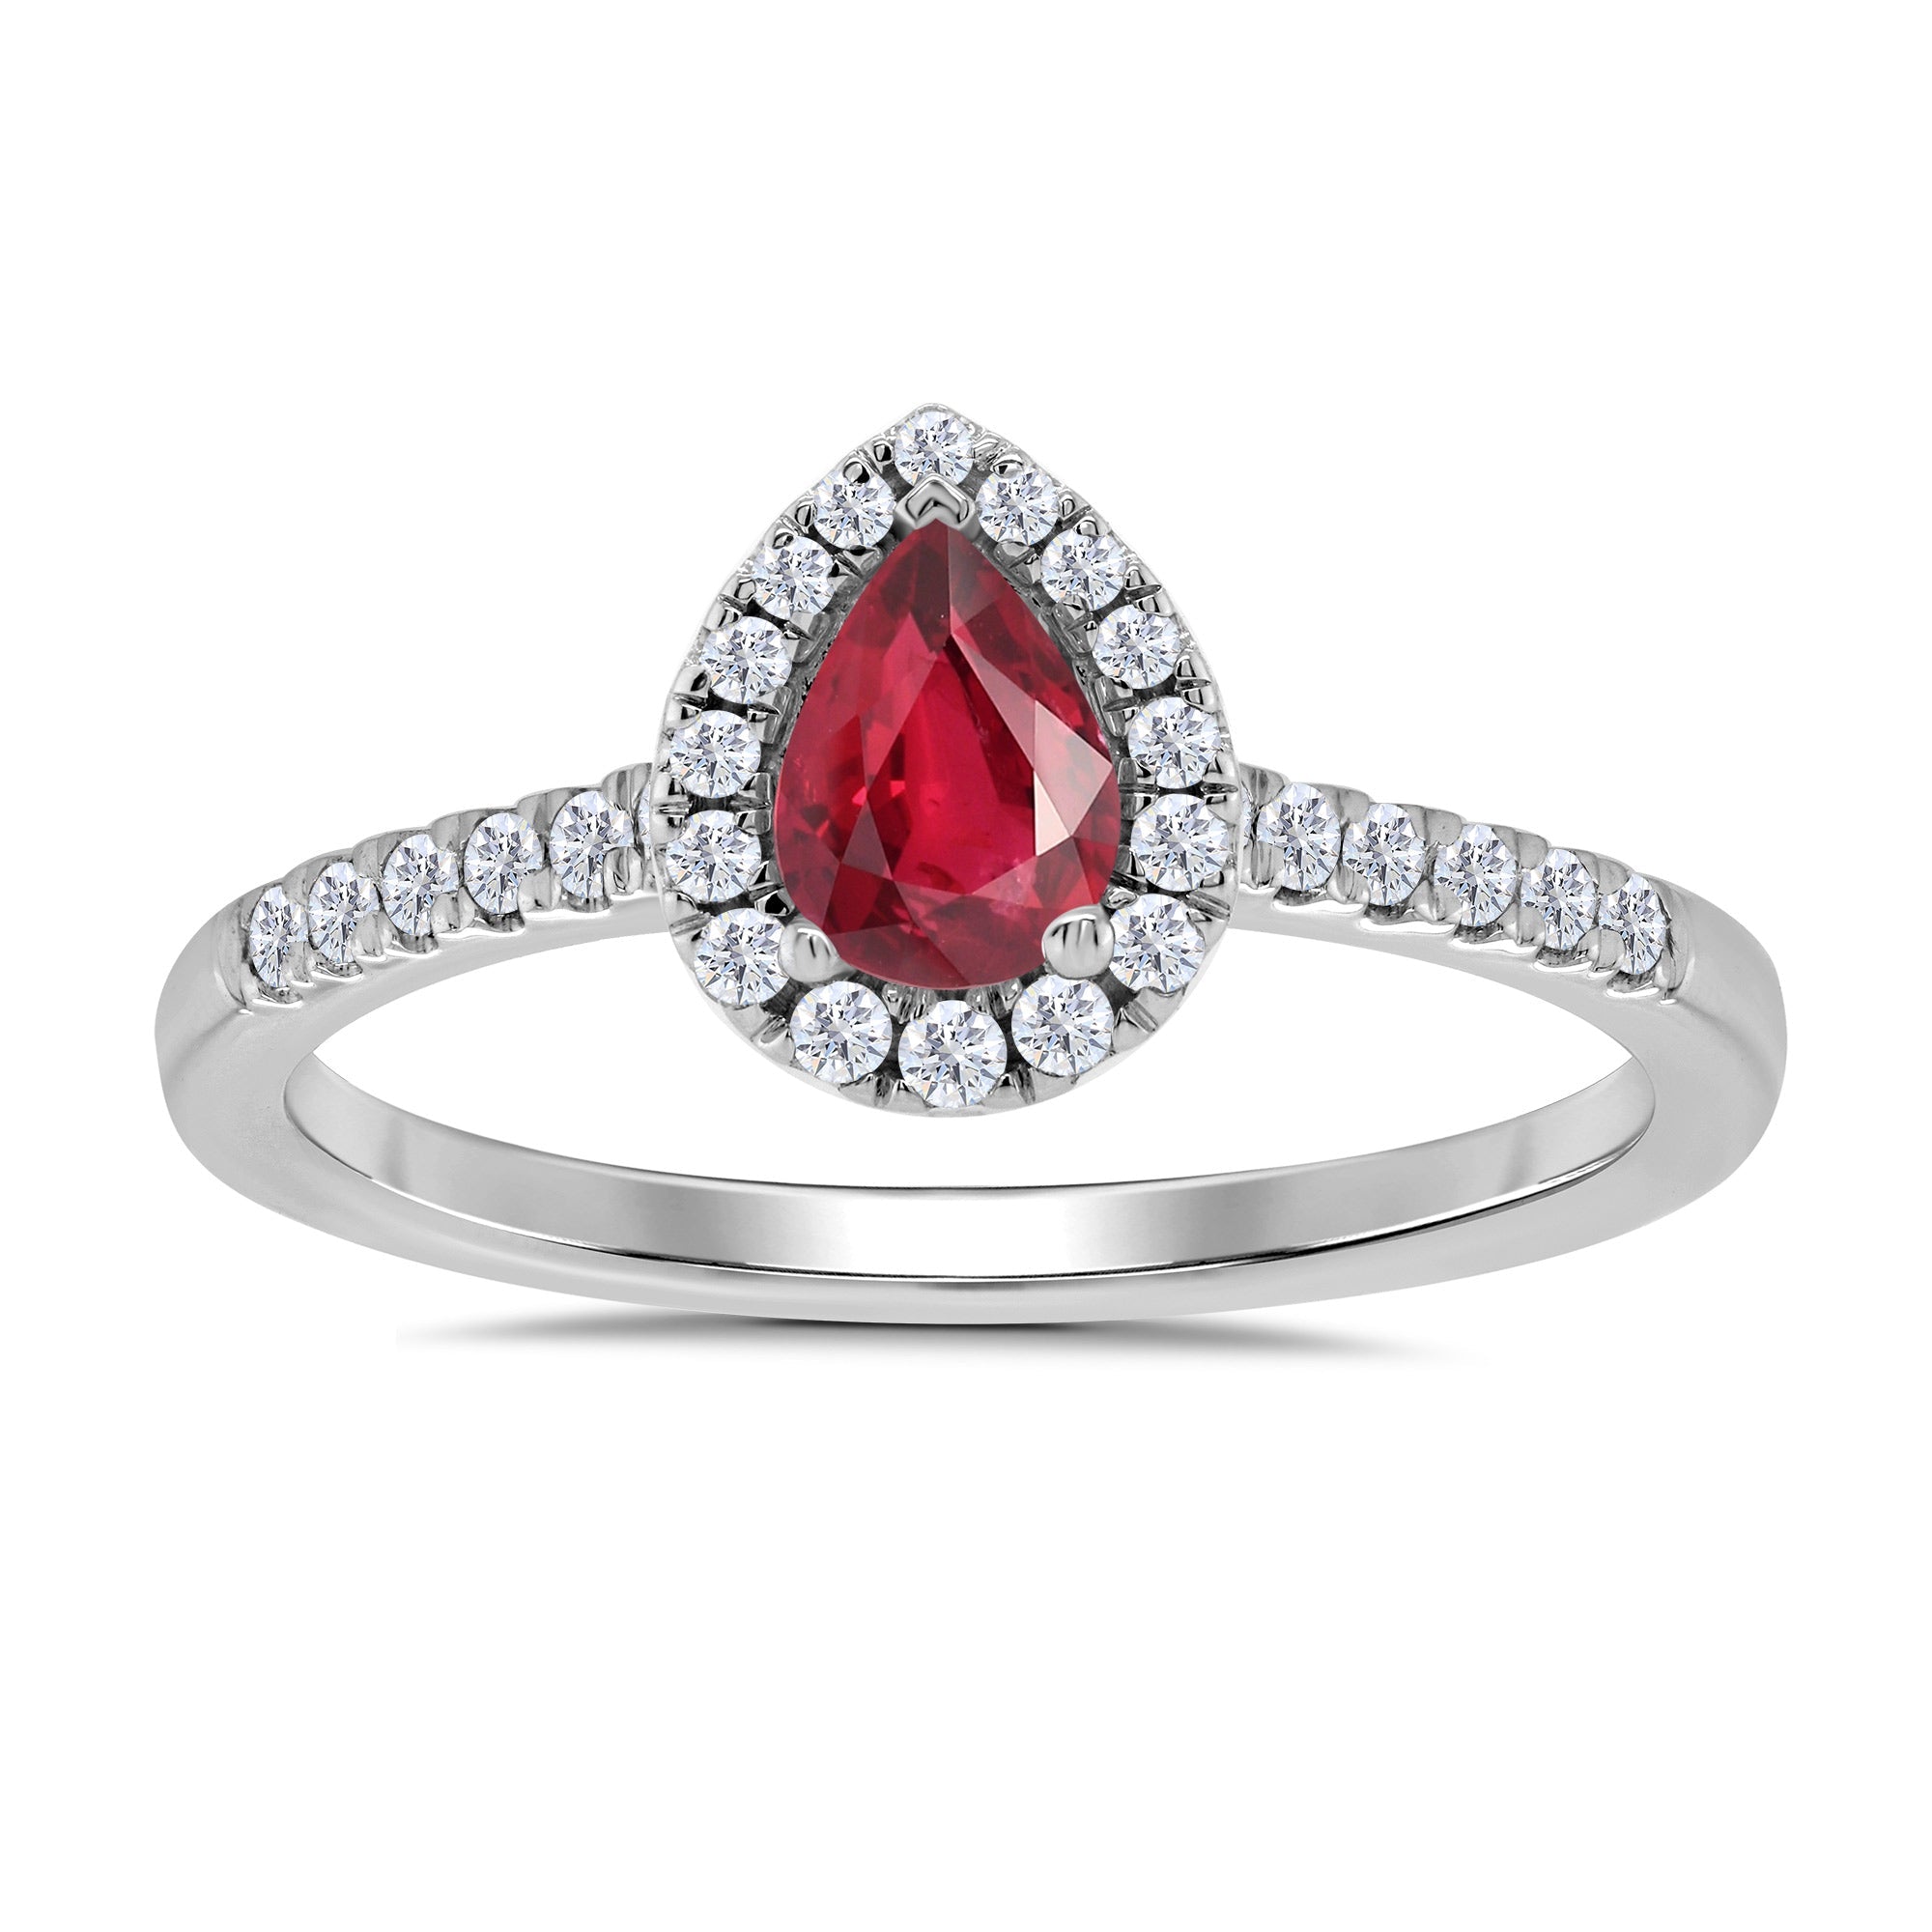 9ct white gold 6x4mm pear shape ruby & diamond cluster ring with diamond set shoulders 0.20ct